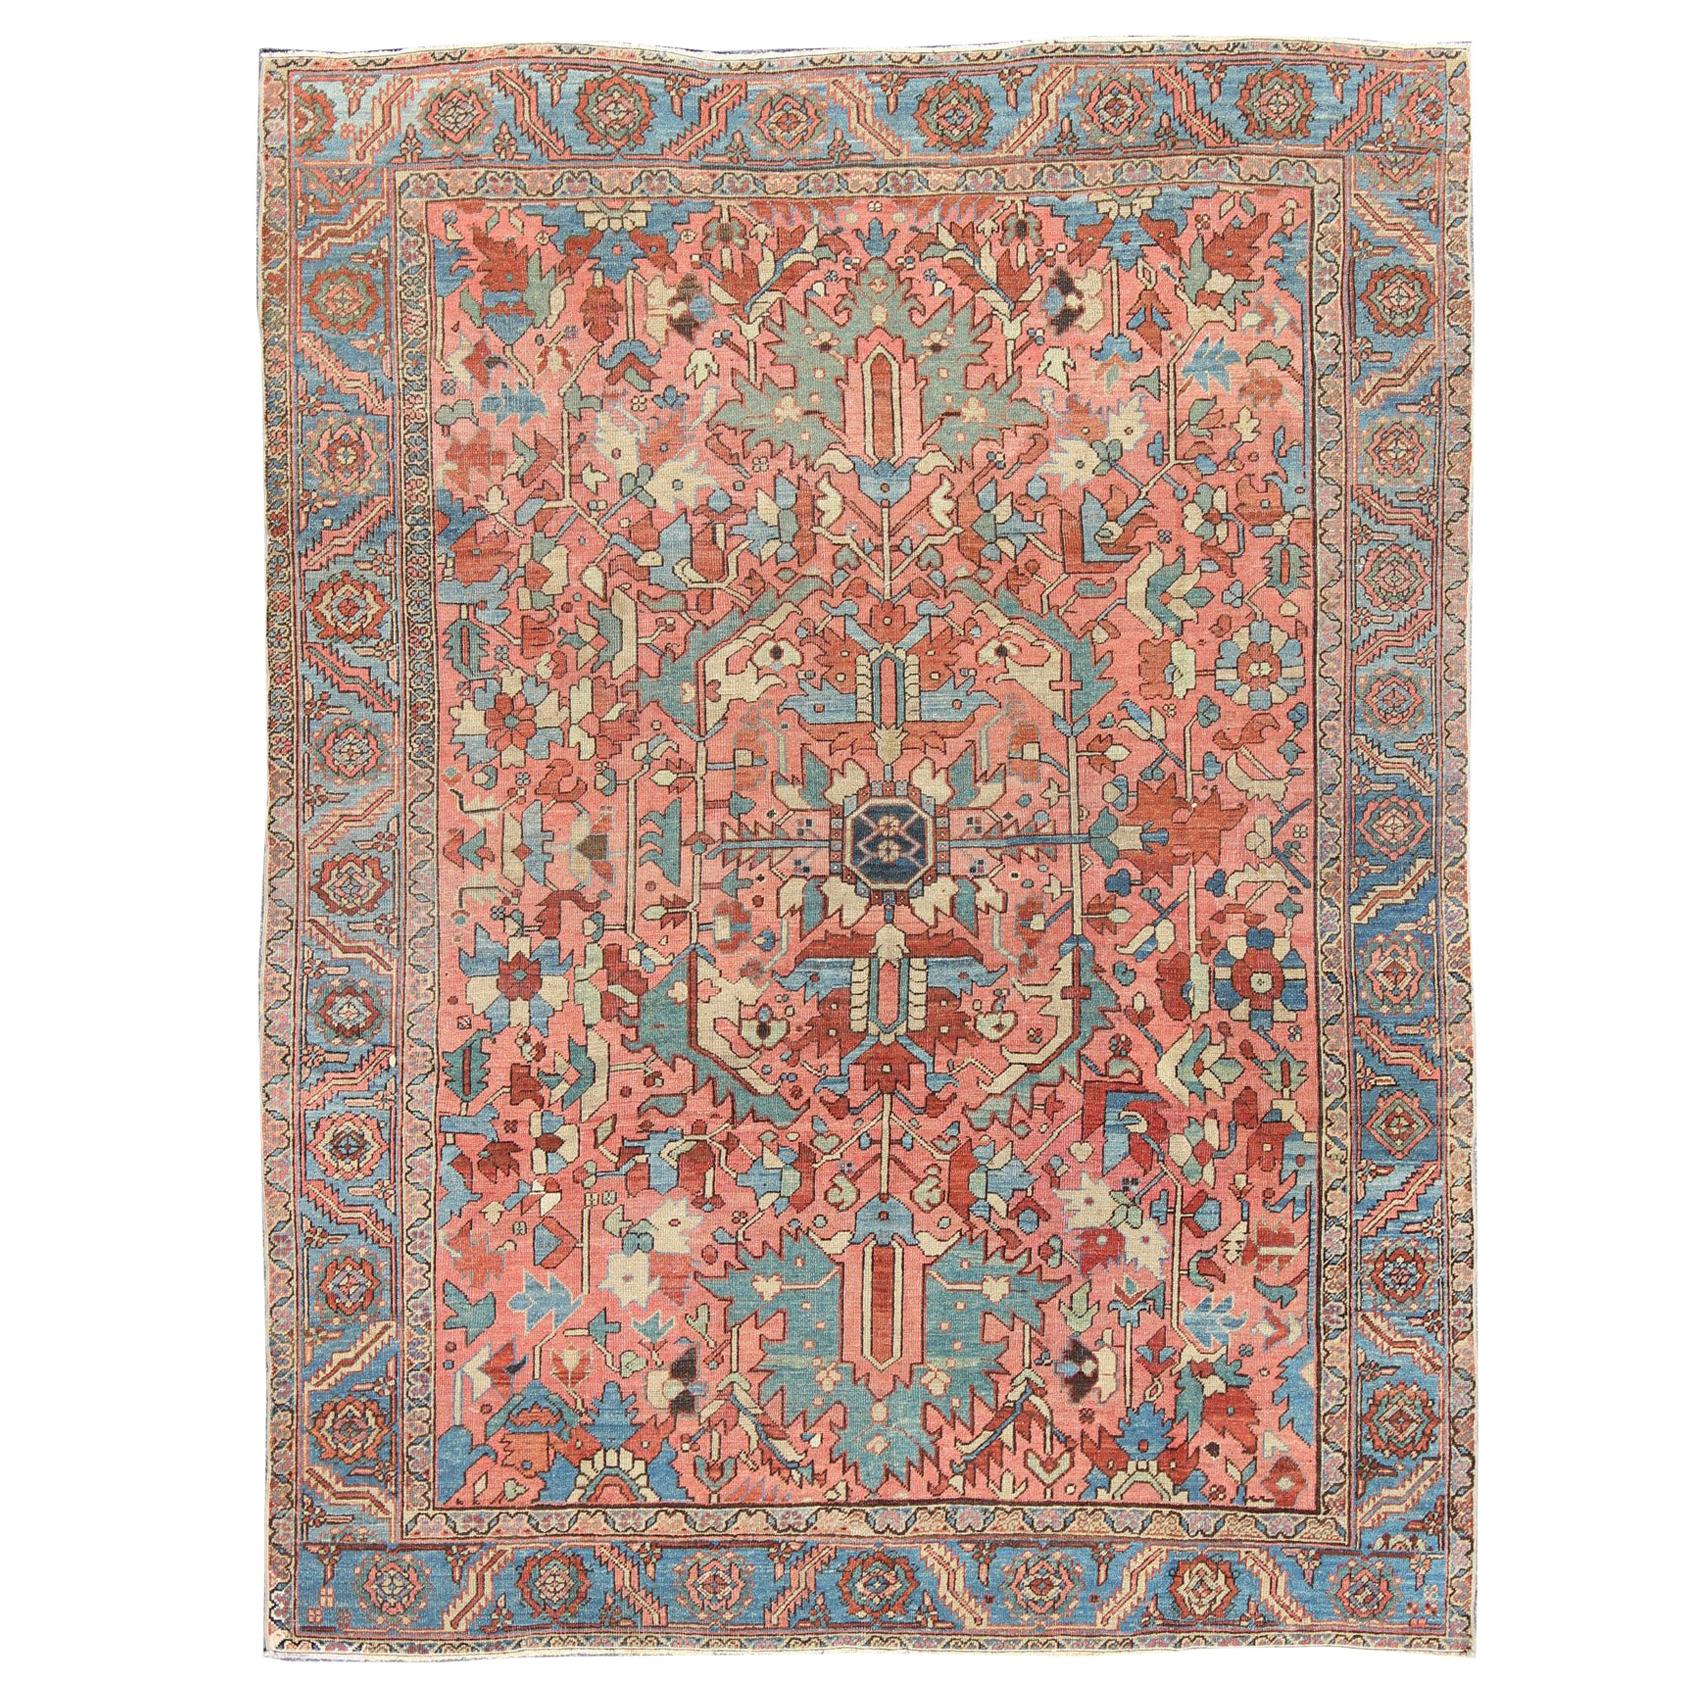 Antique Persian Serapi Rug with All-Over Geometric Design in Salmon, Light Blue